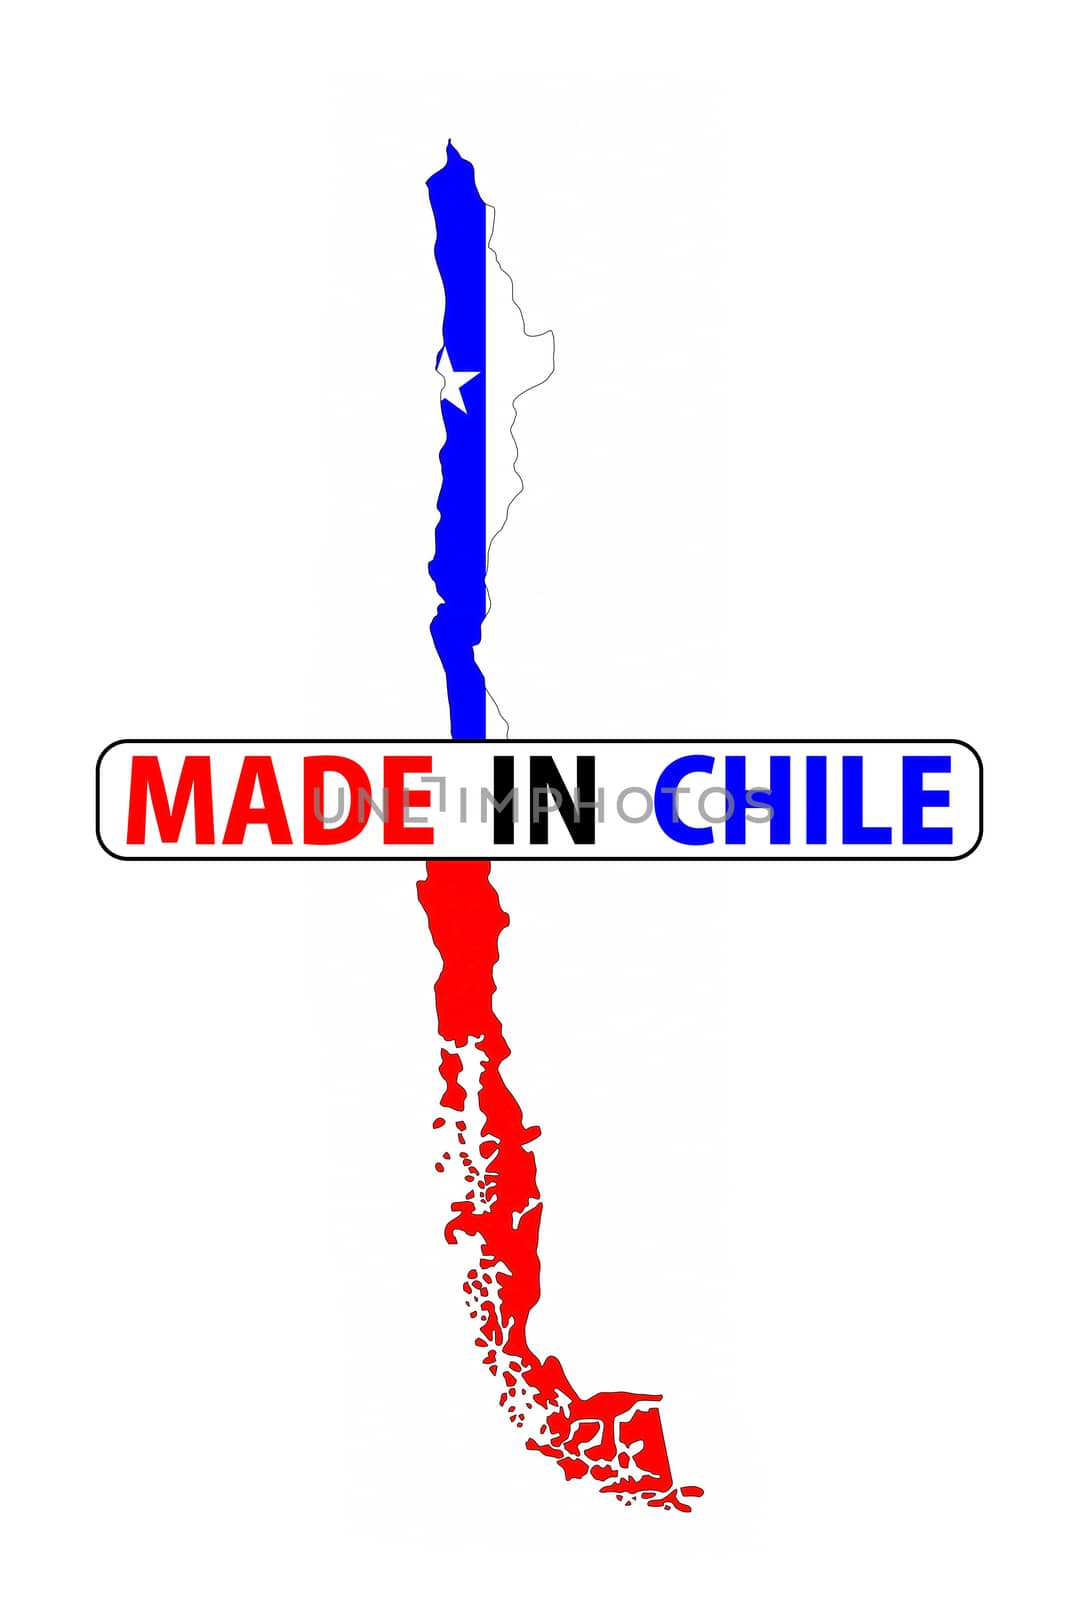 made in chile by tony4urban